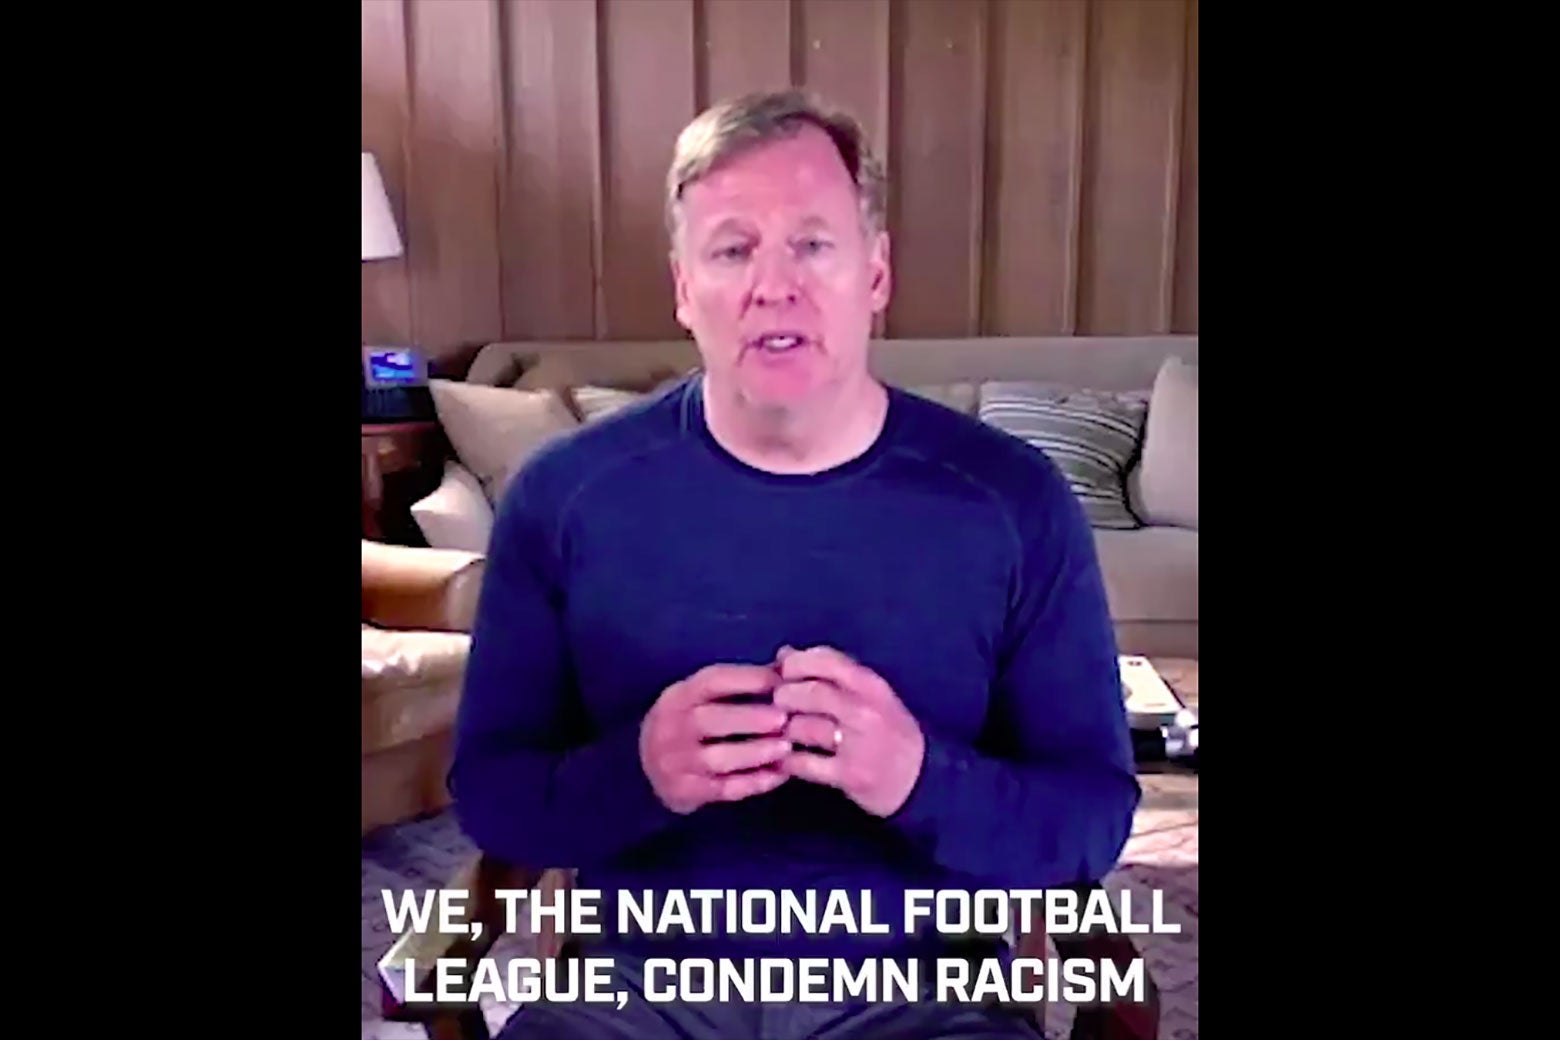 Screenshot of Roger Goodell on video with the subtitle "We, the National Football League, condemn racism."